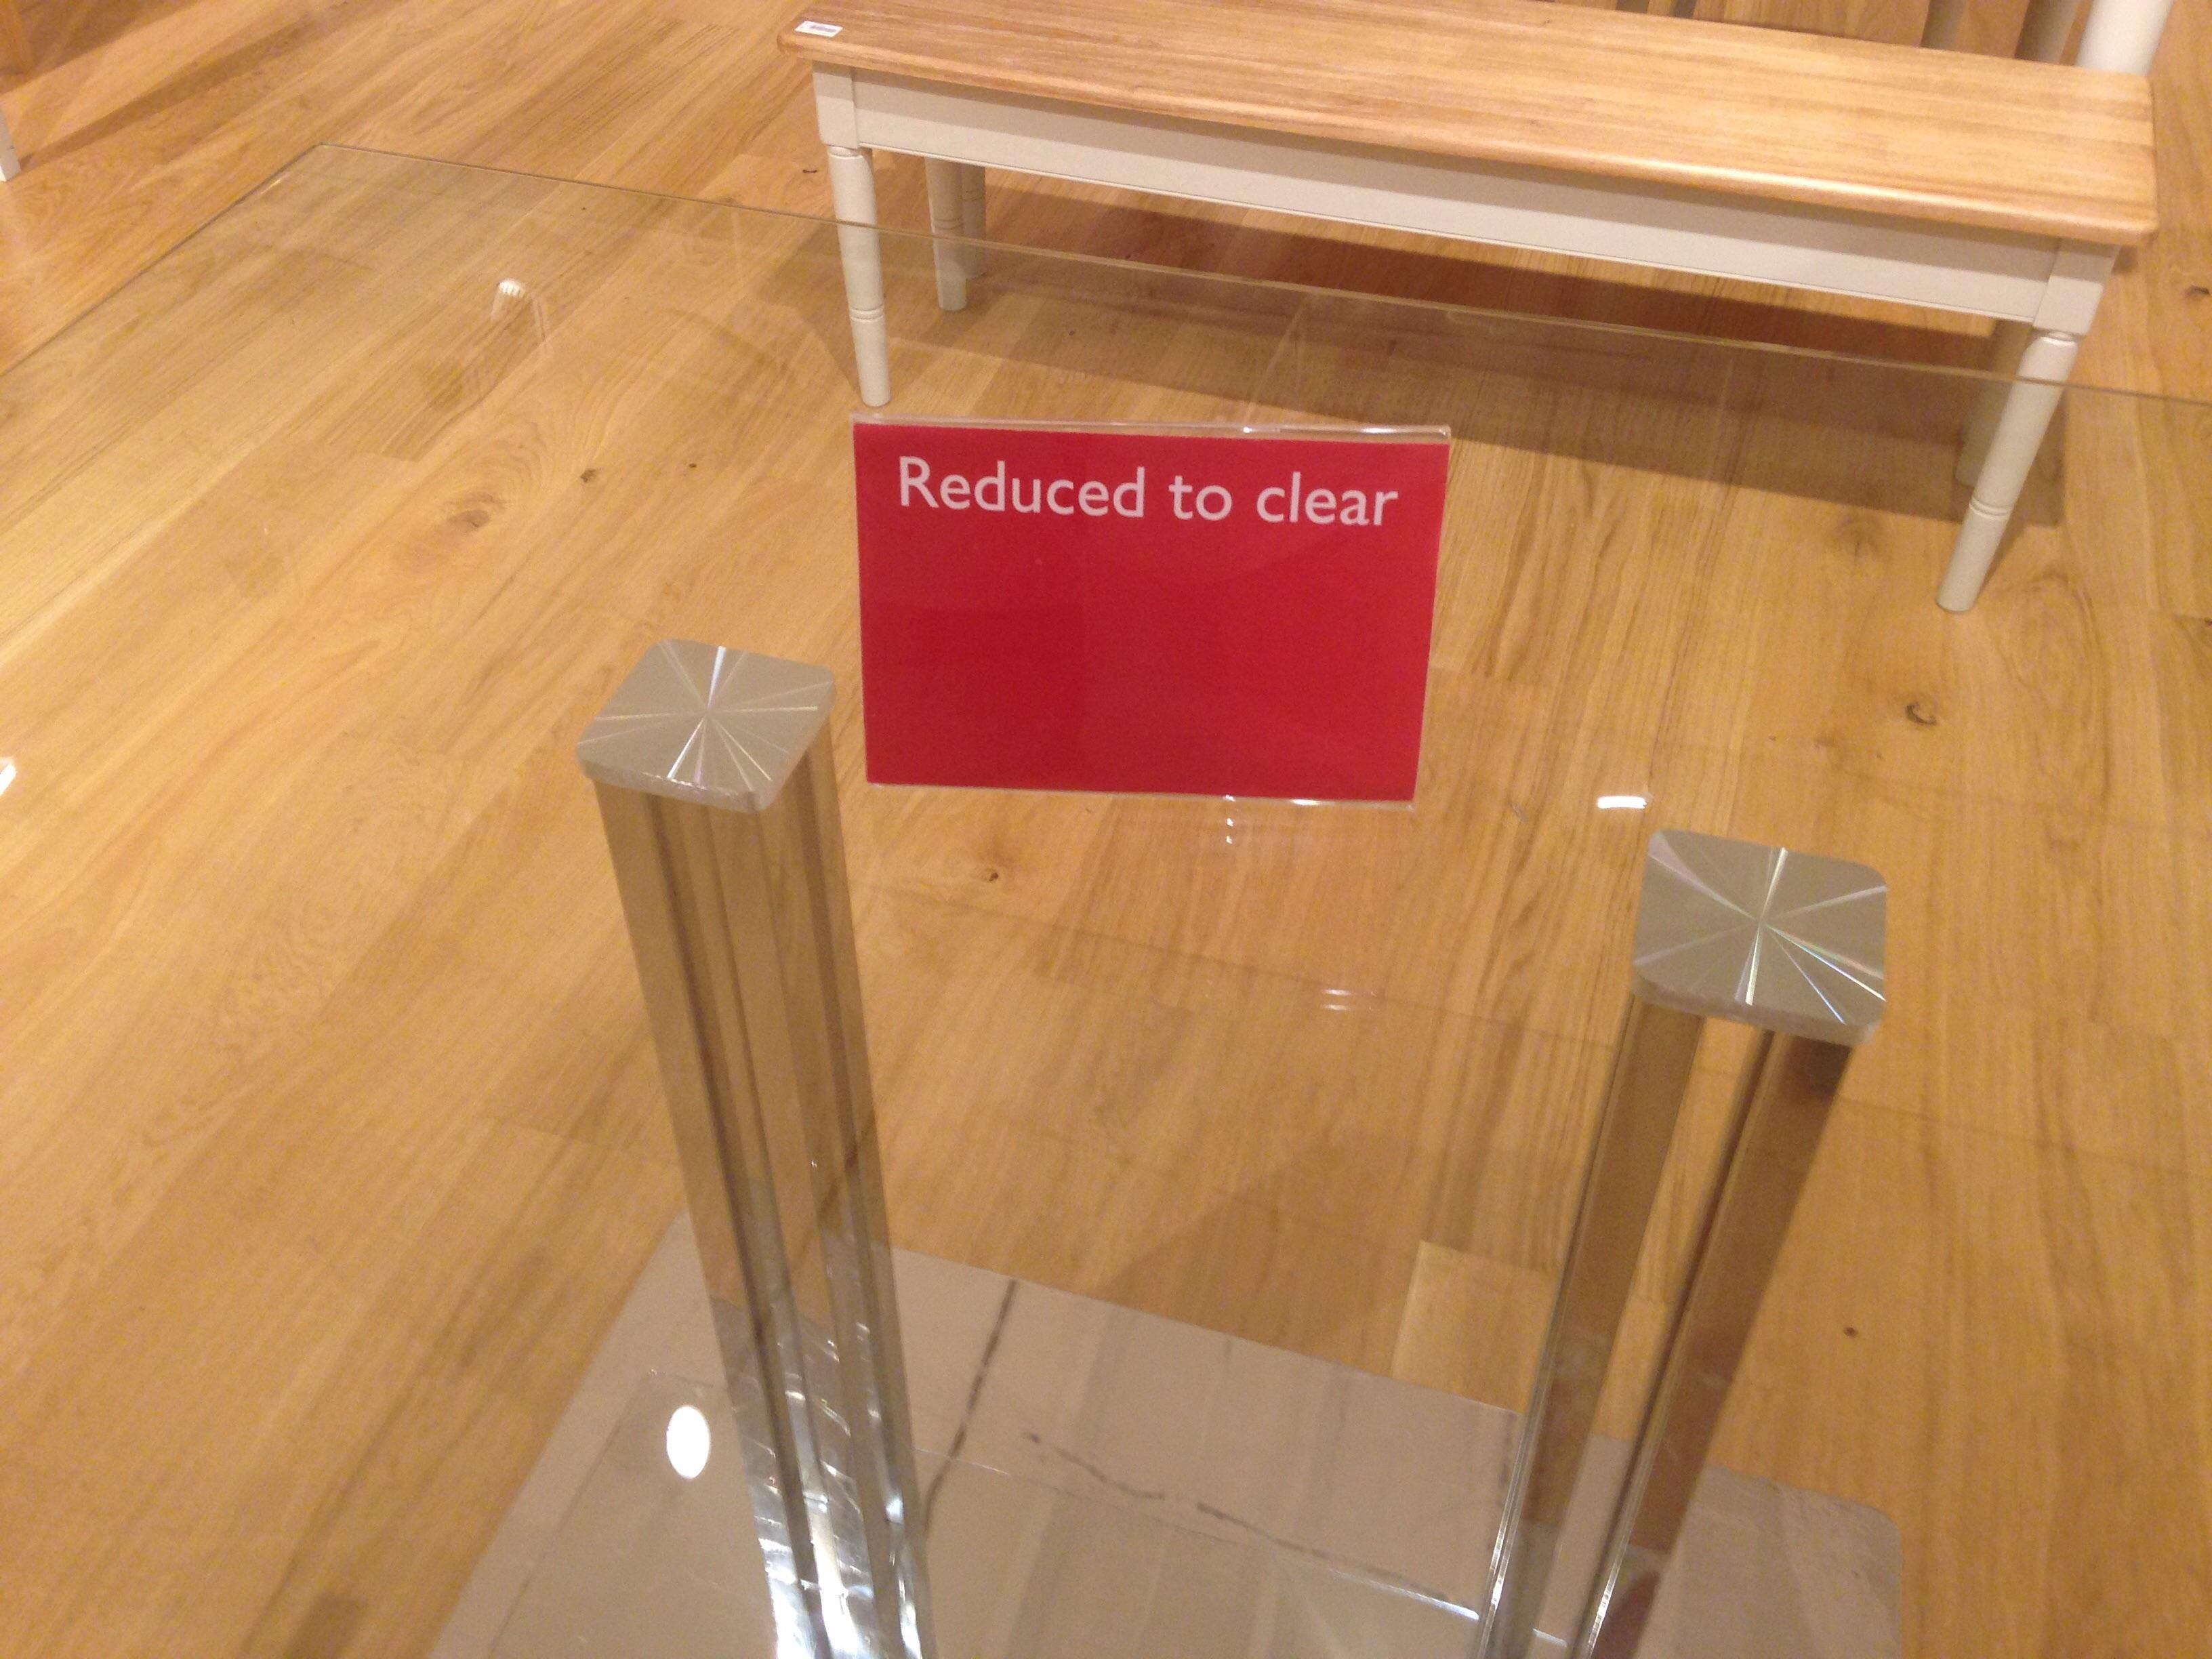 You wouldn't believe it but this table was wooden before discount